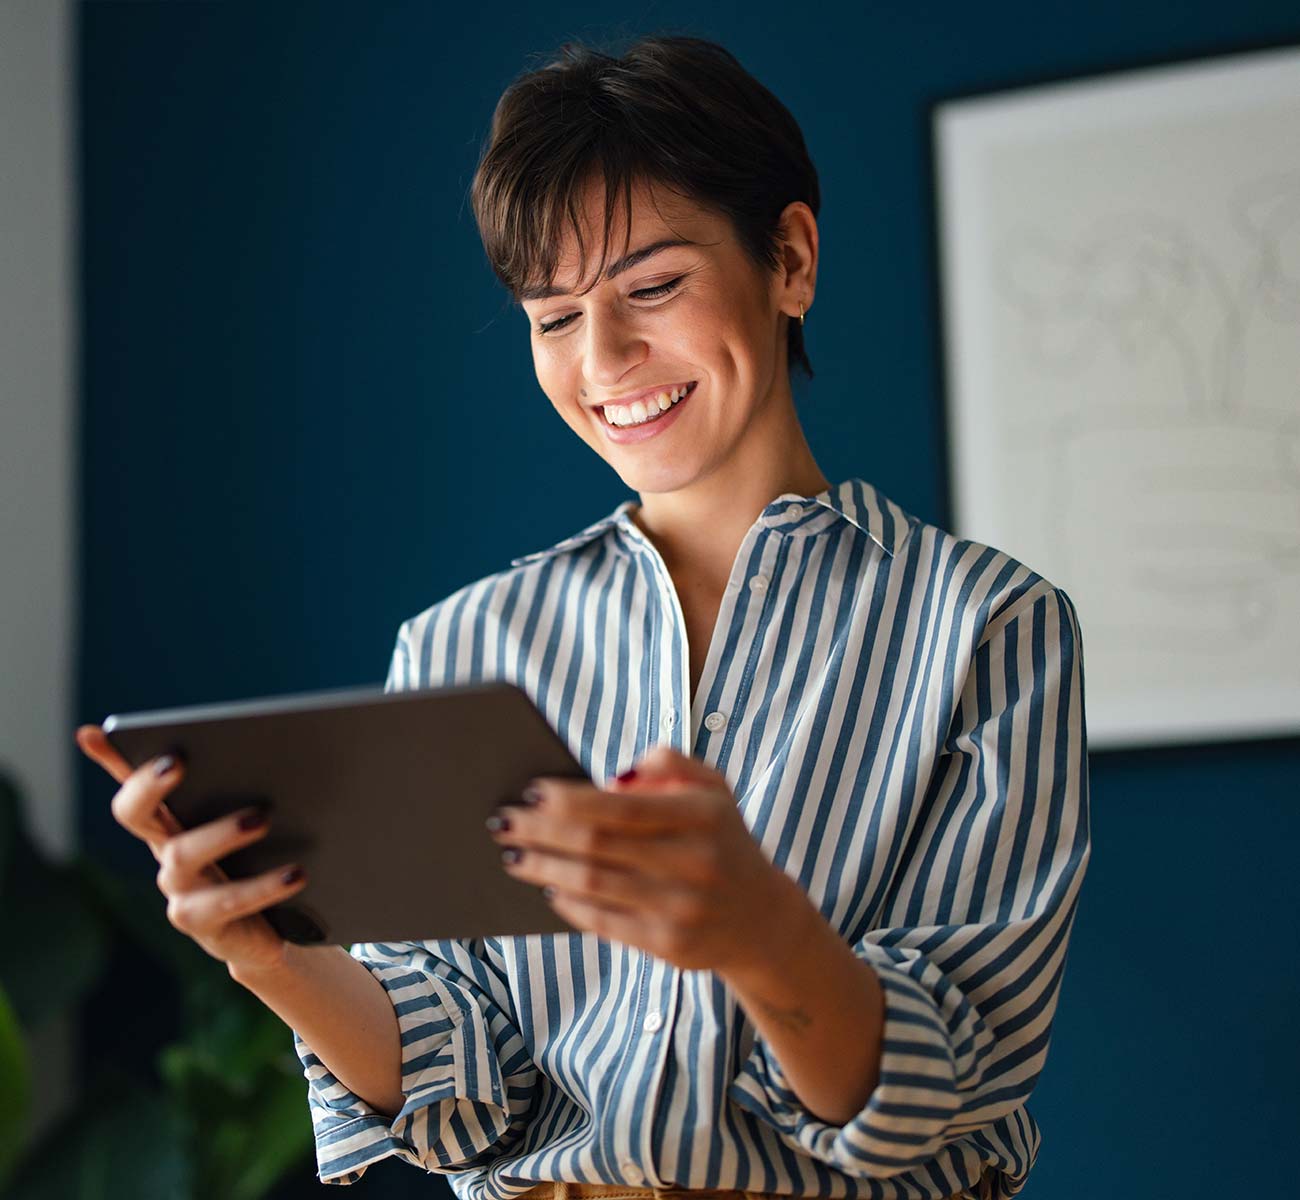 Smiling young brunette holding a tablet